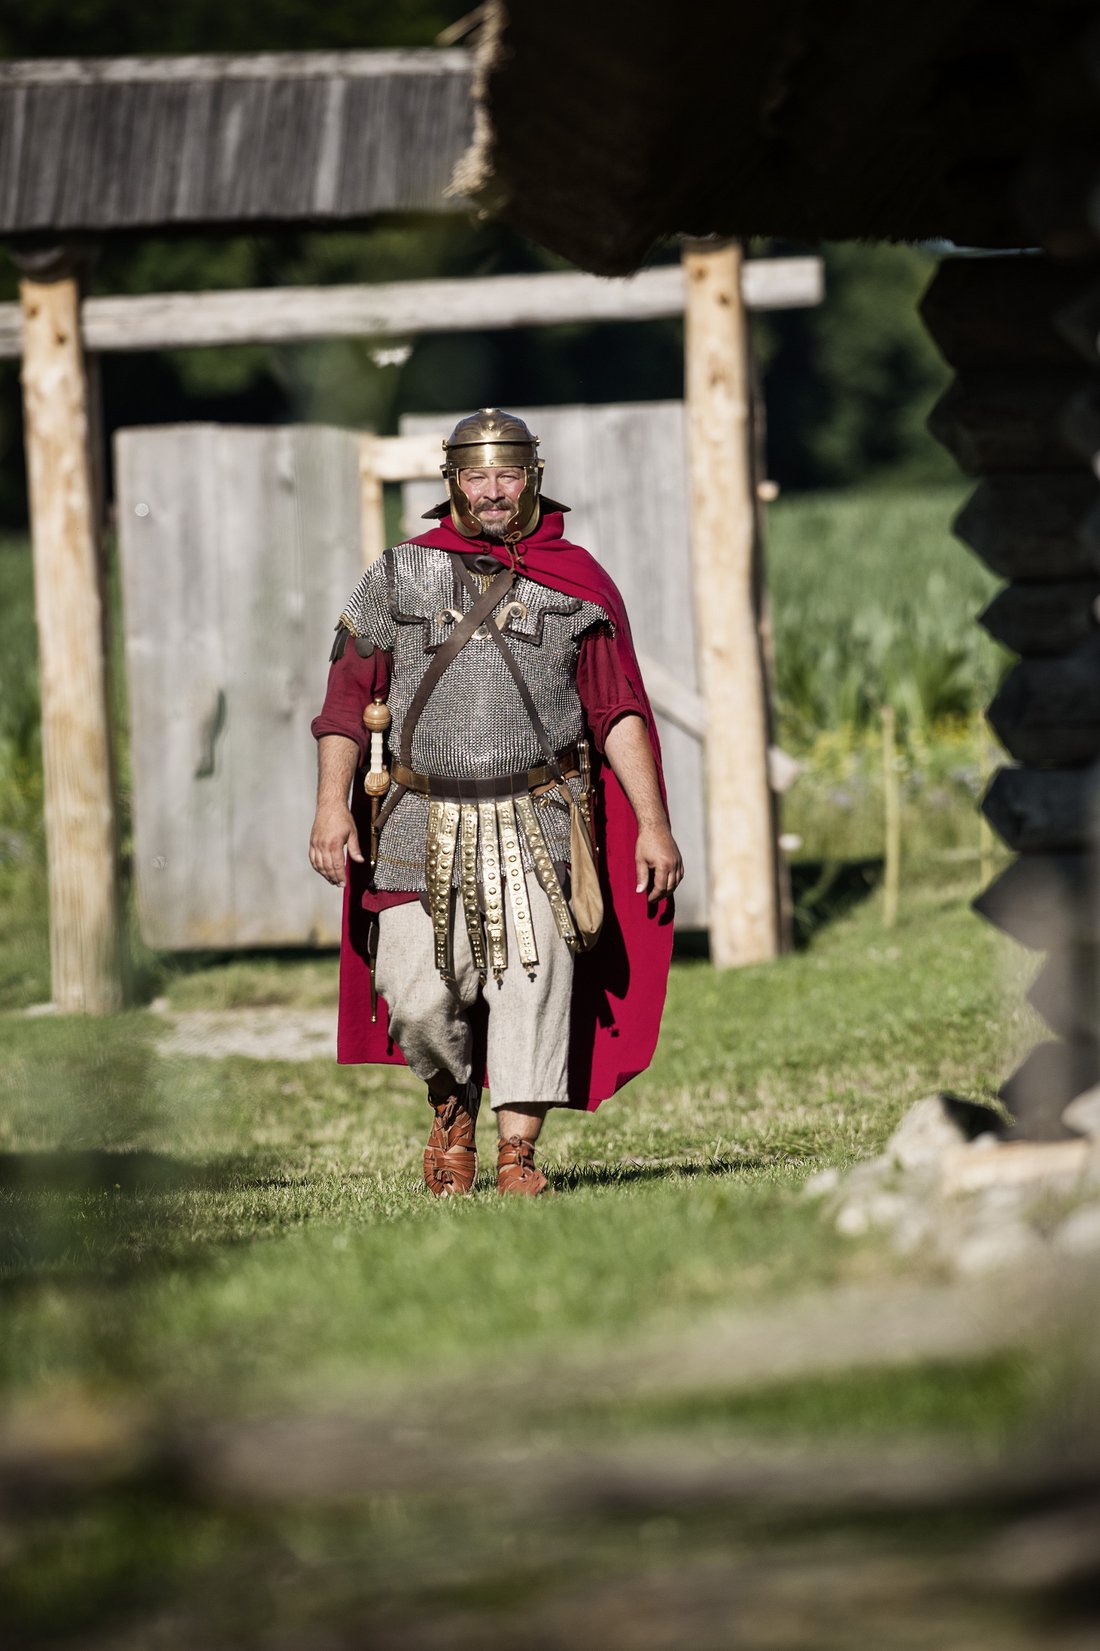 Romans in the Roman town of Seeon-Seebruck